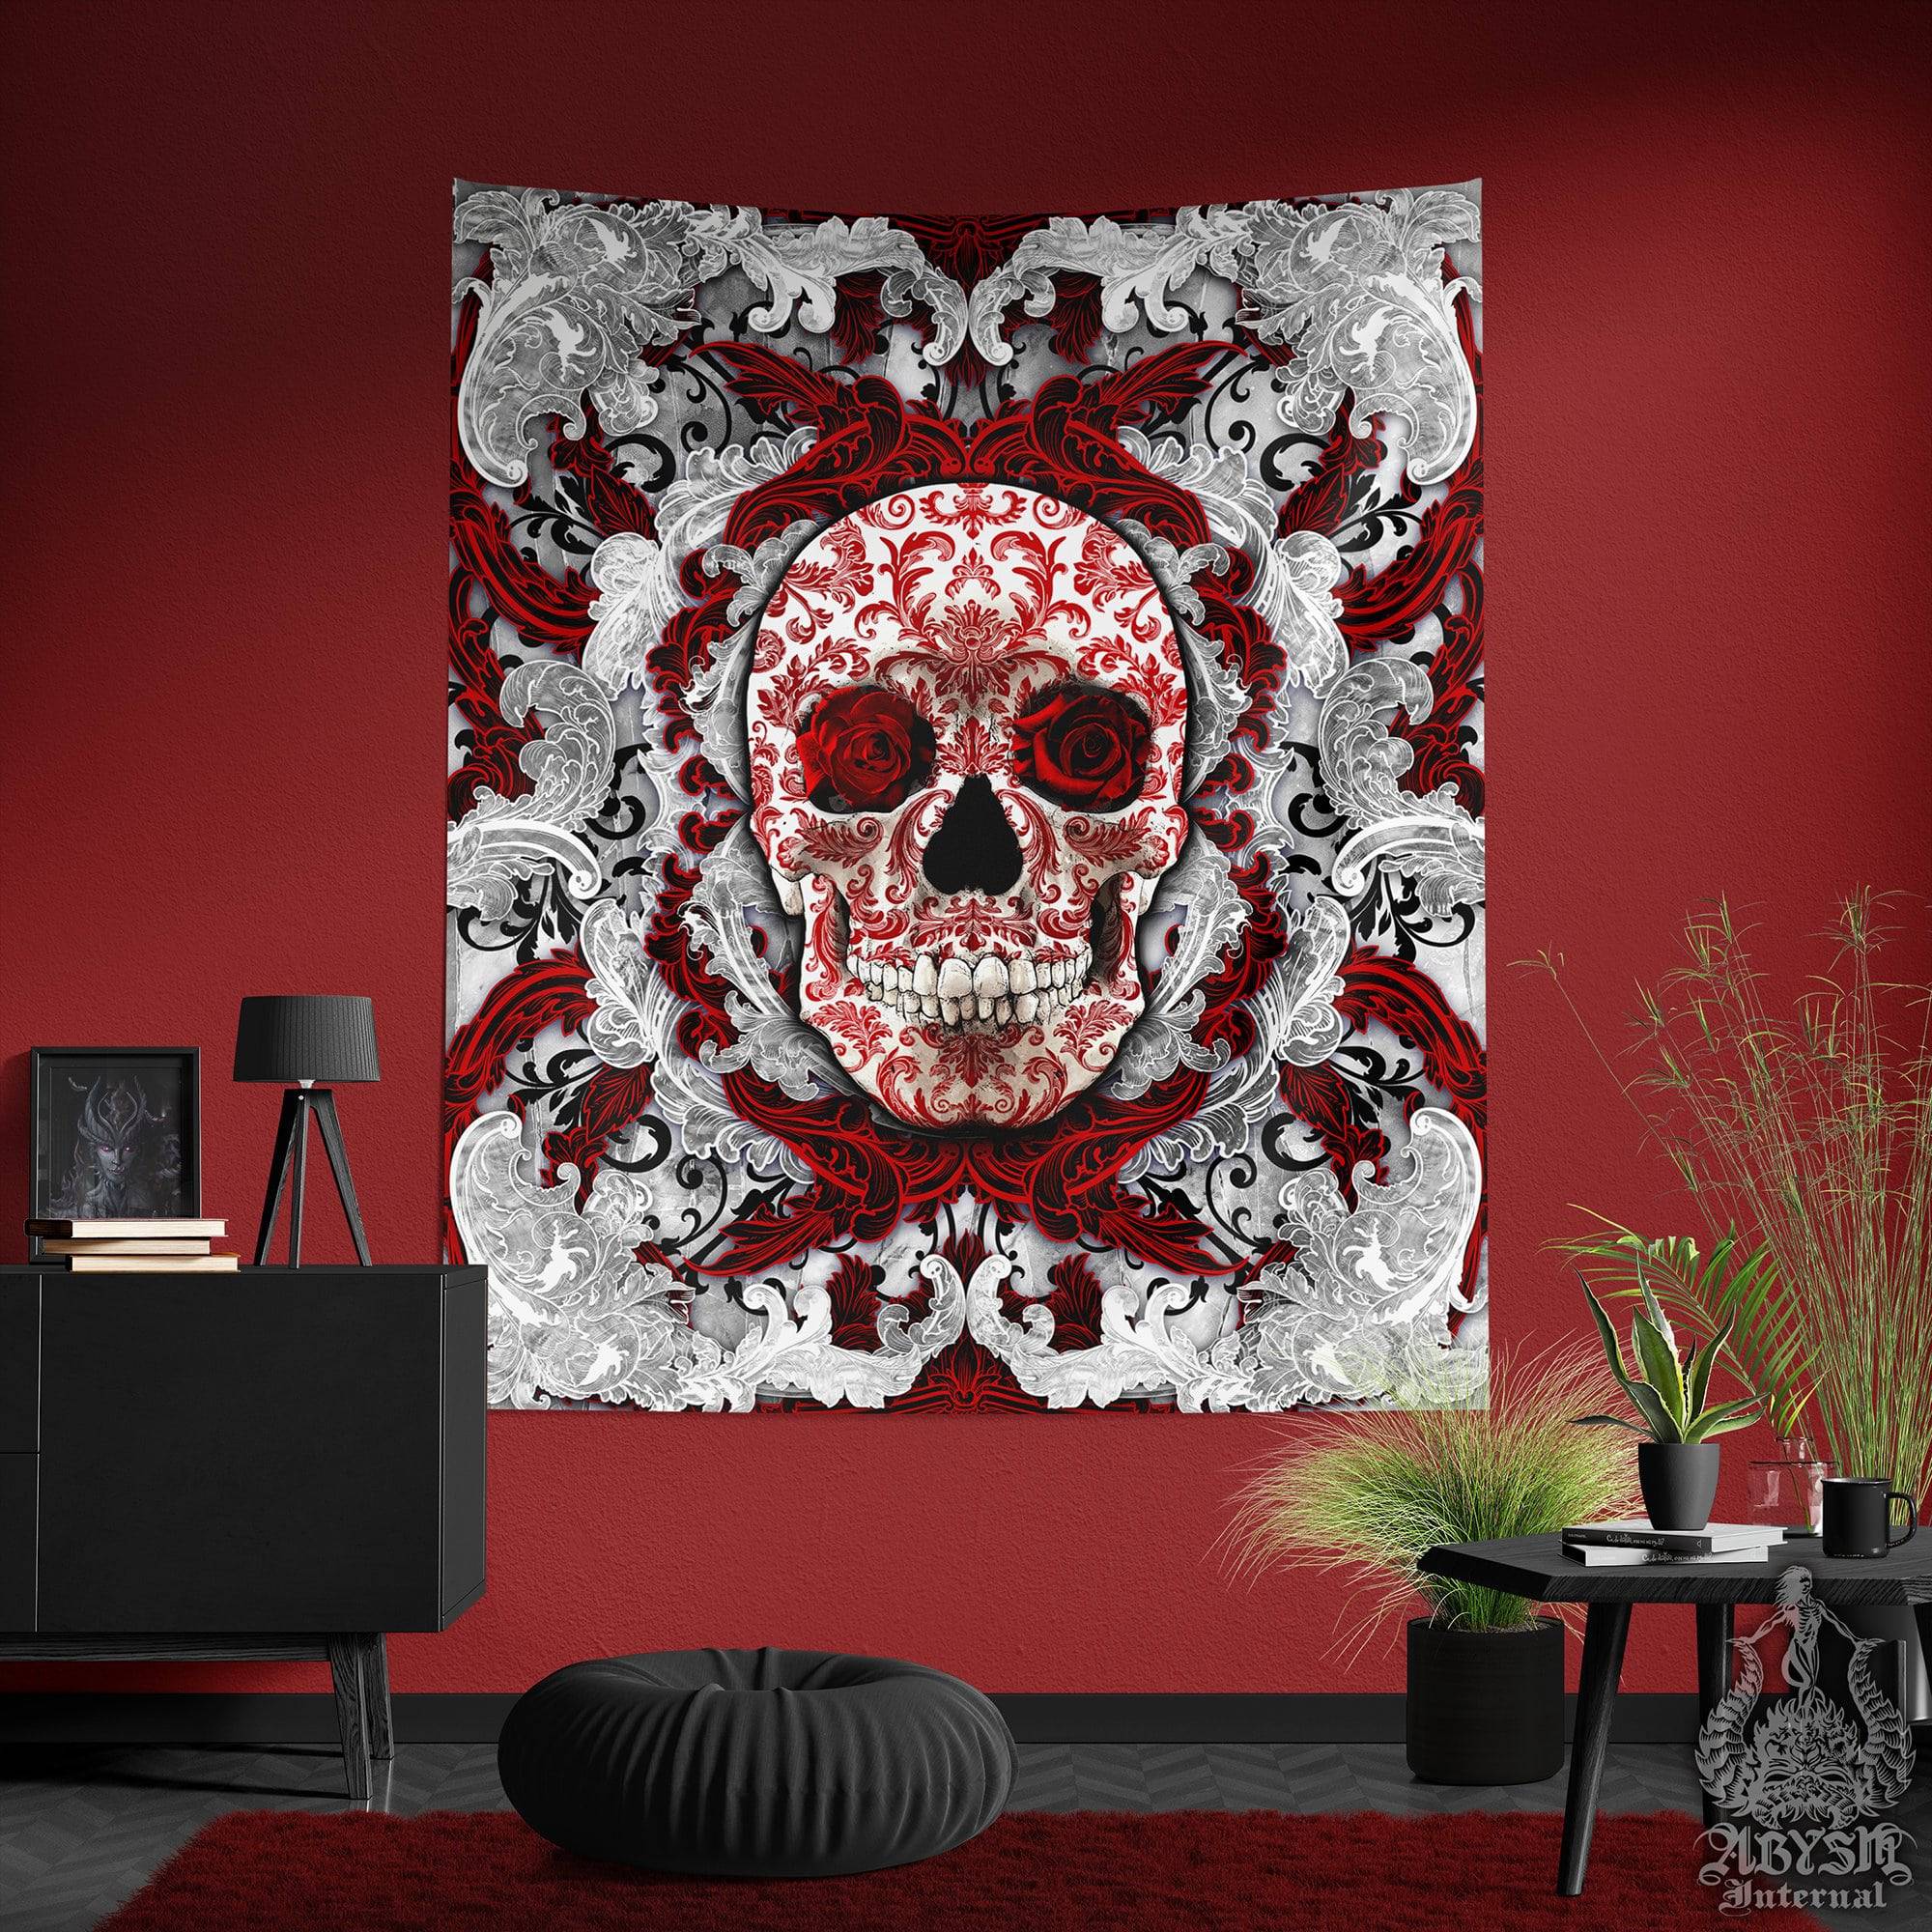 Skull Tapestry, Gothic Wall Hanging, Macabre Home Decor, Art Print - White Goth, Bloody & Red Roses - Abysm Internal